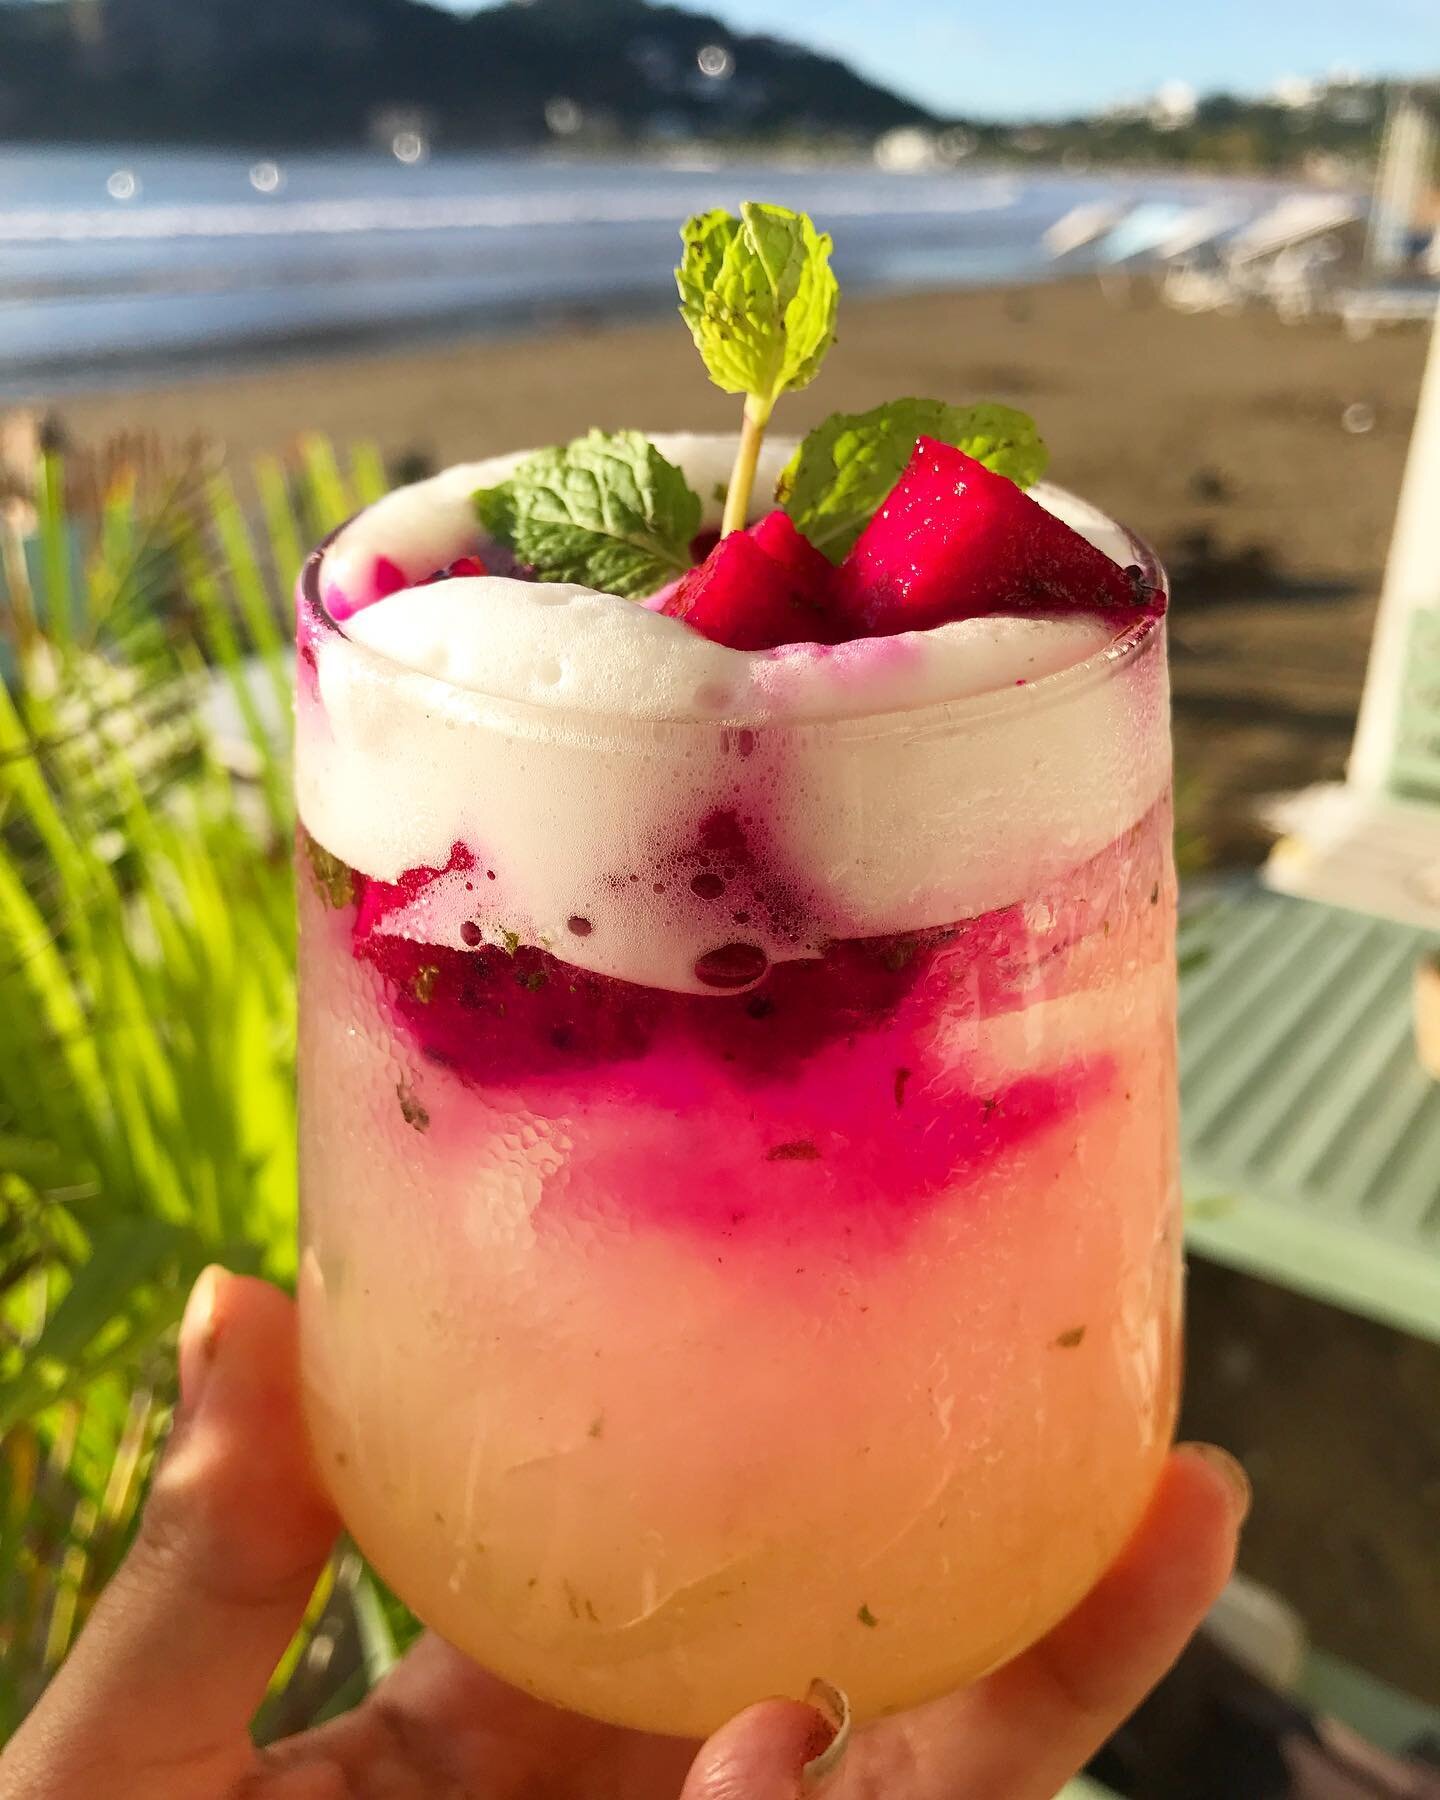 Join us for the sunset &amp; cocktail of the day: rhum, pineapple, mint &amp; dragon fruit 🌺 ☀️